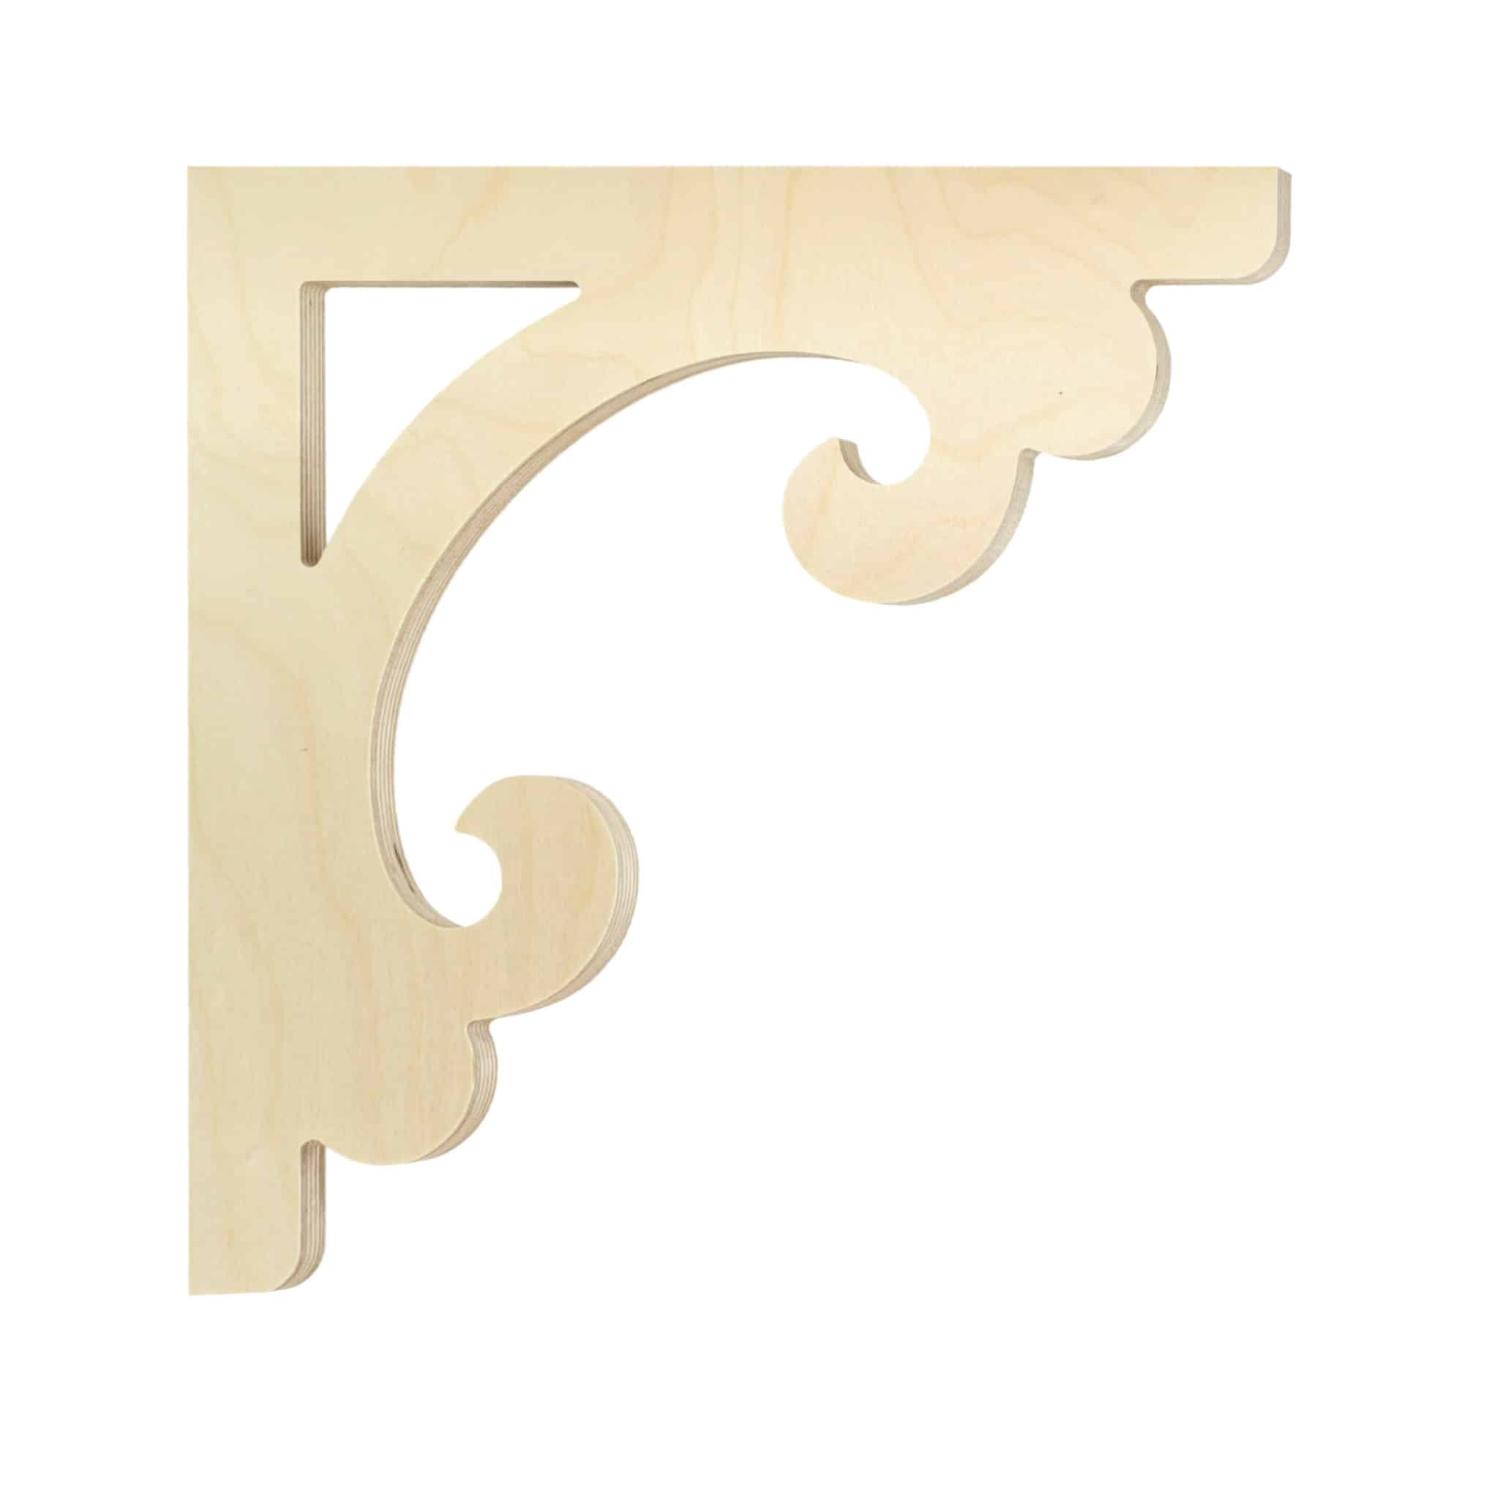 Bracket 029 - Classic wooden gingerbread corbel & bracket in Victorian style and with ornaments for porch, portico and veranda.